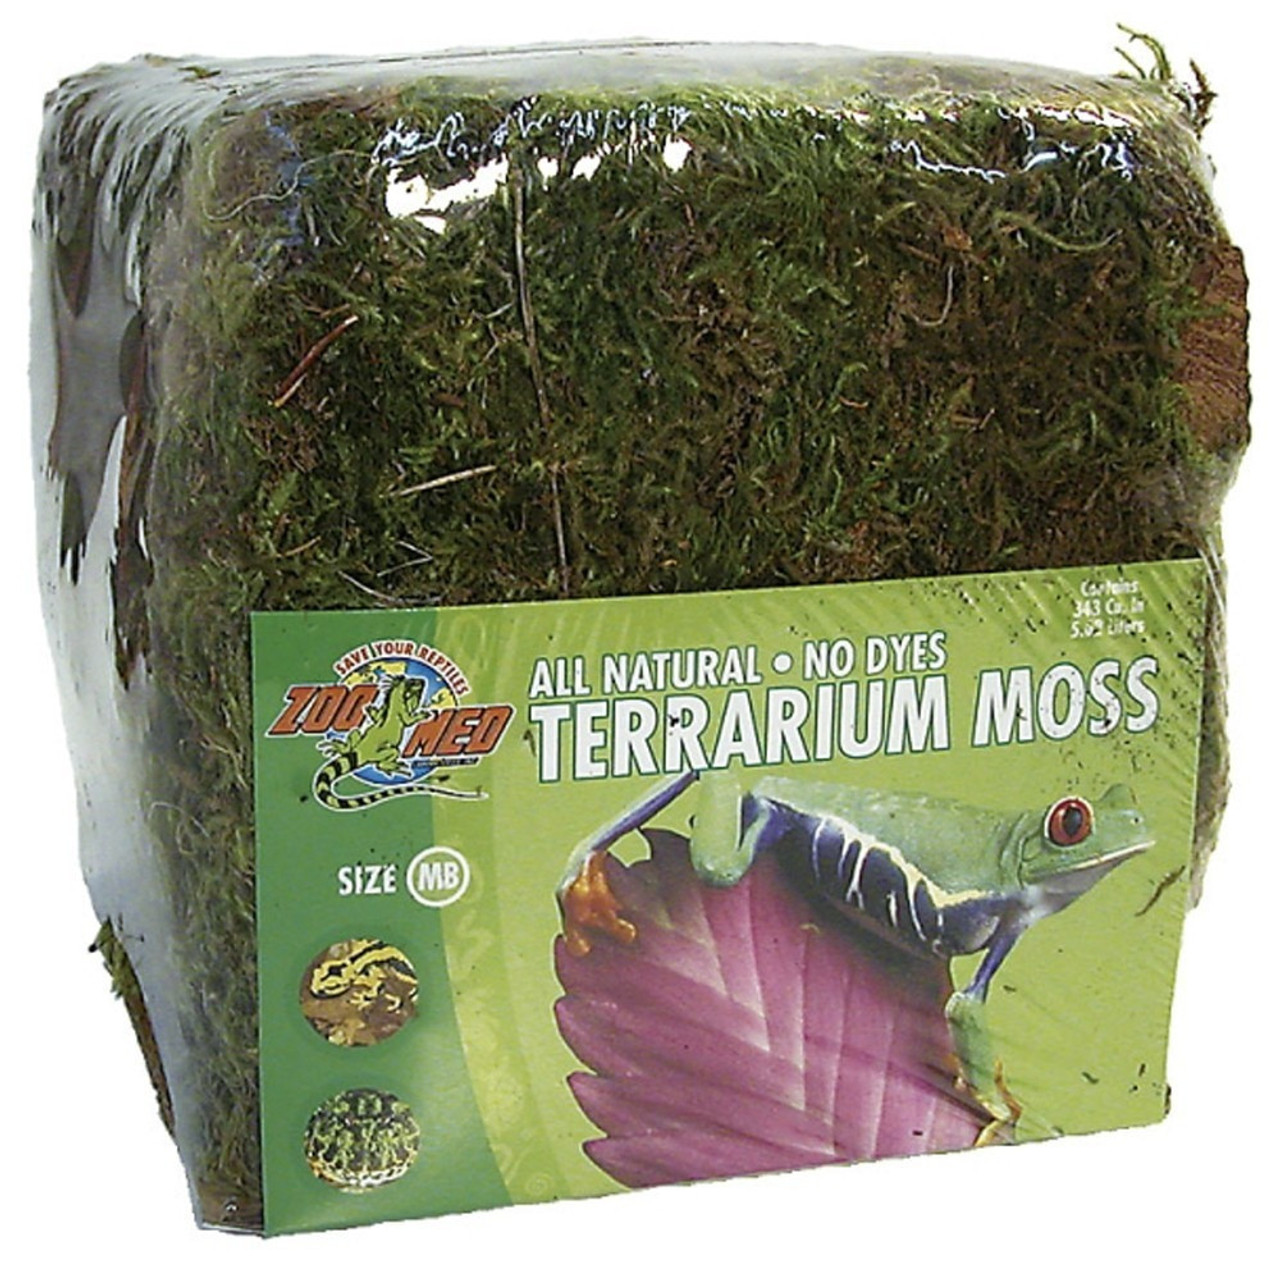 Exo Terra - Exo Terra Forest Moss is real compressed moss